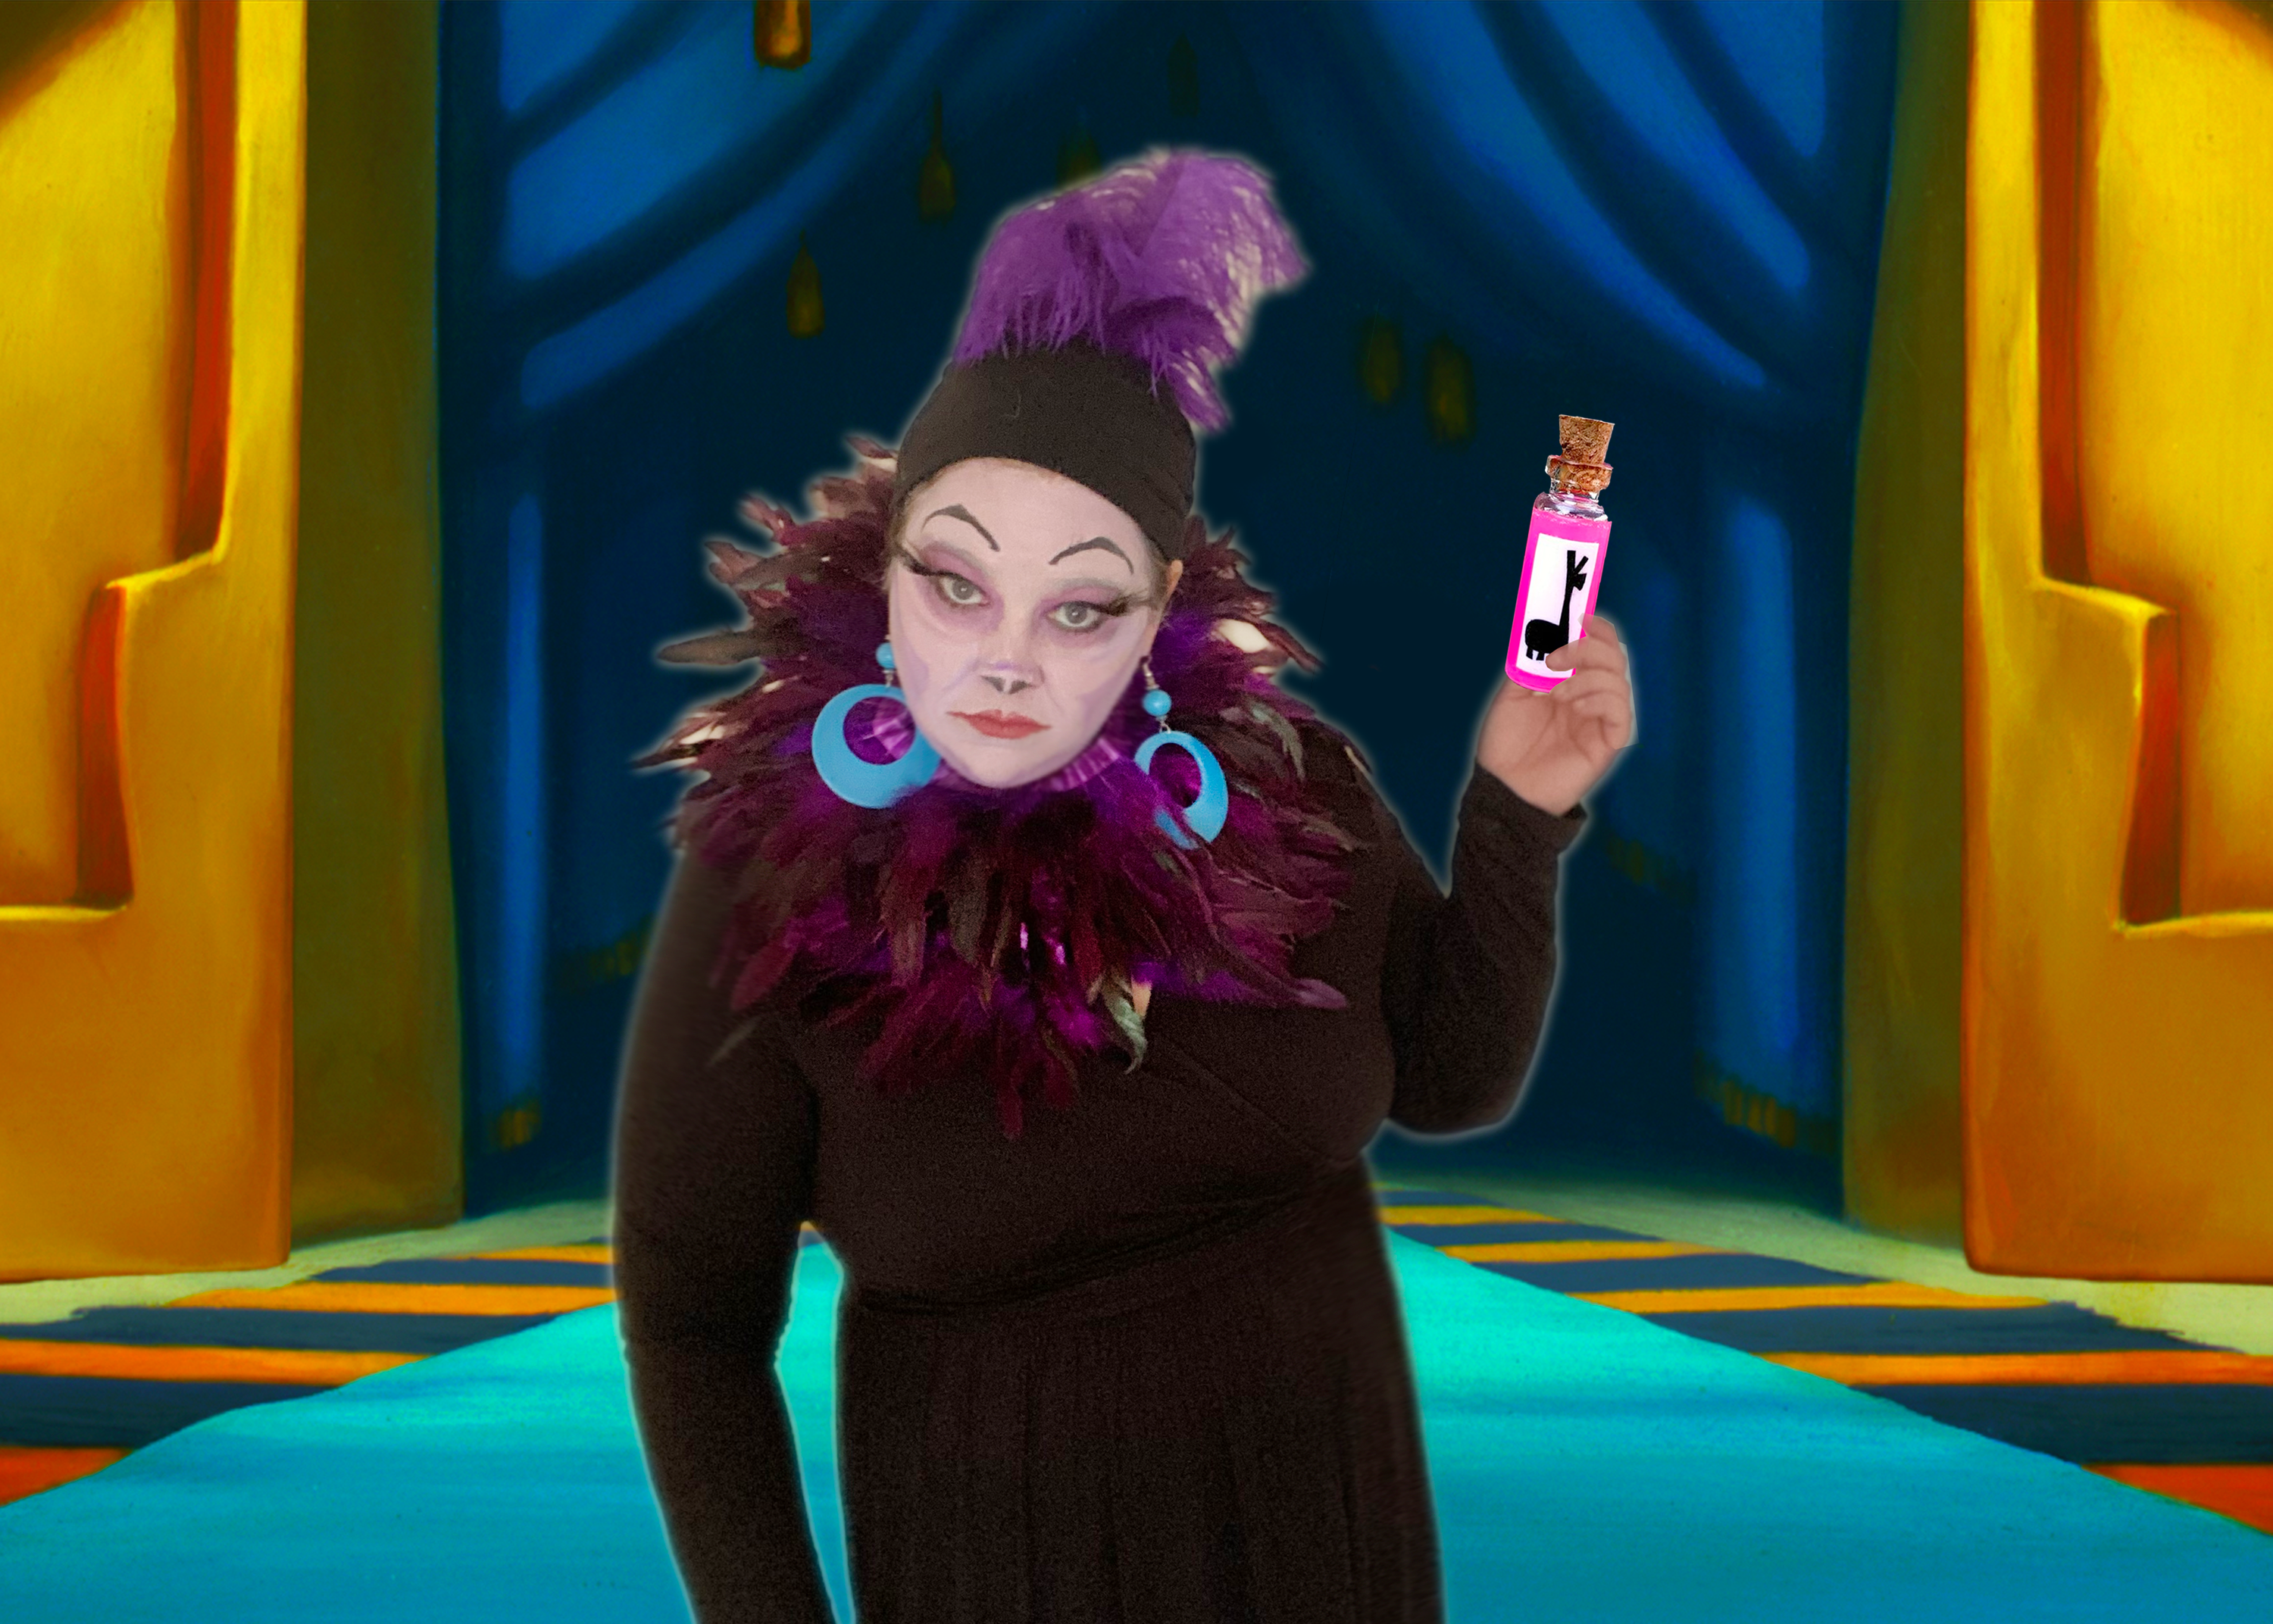 Yzma from The Emperor's New Grove